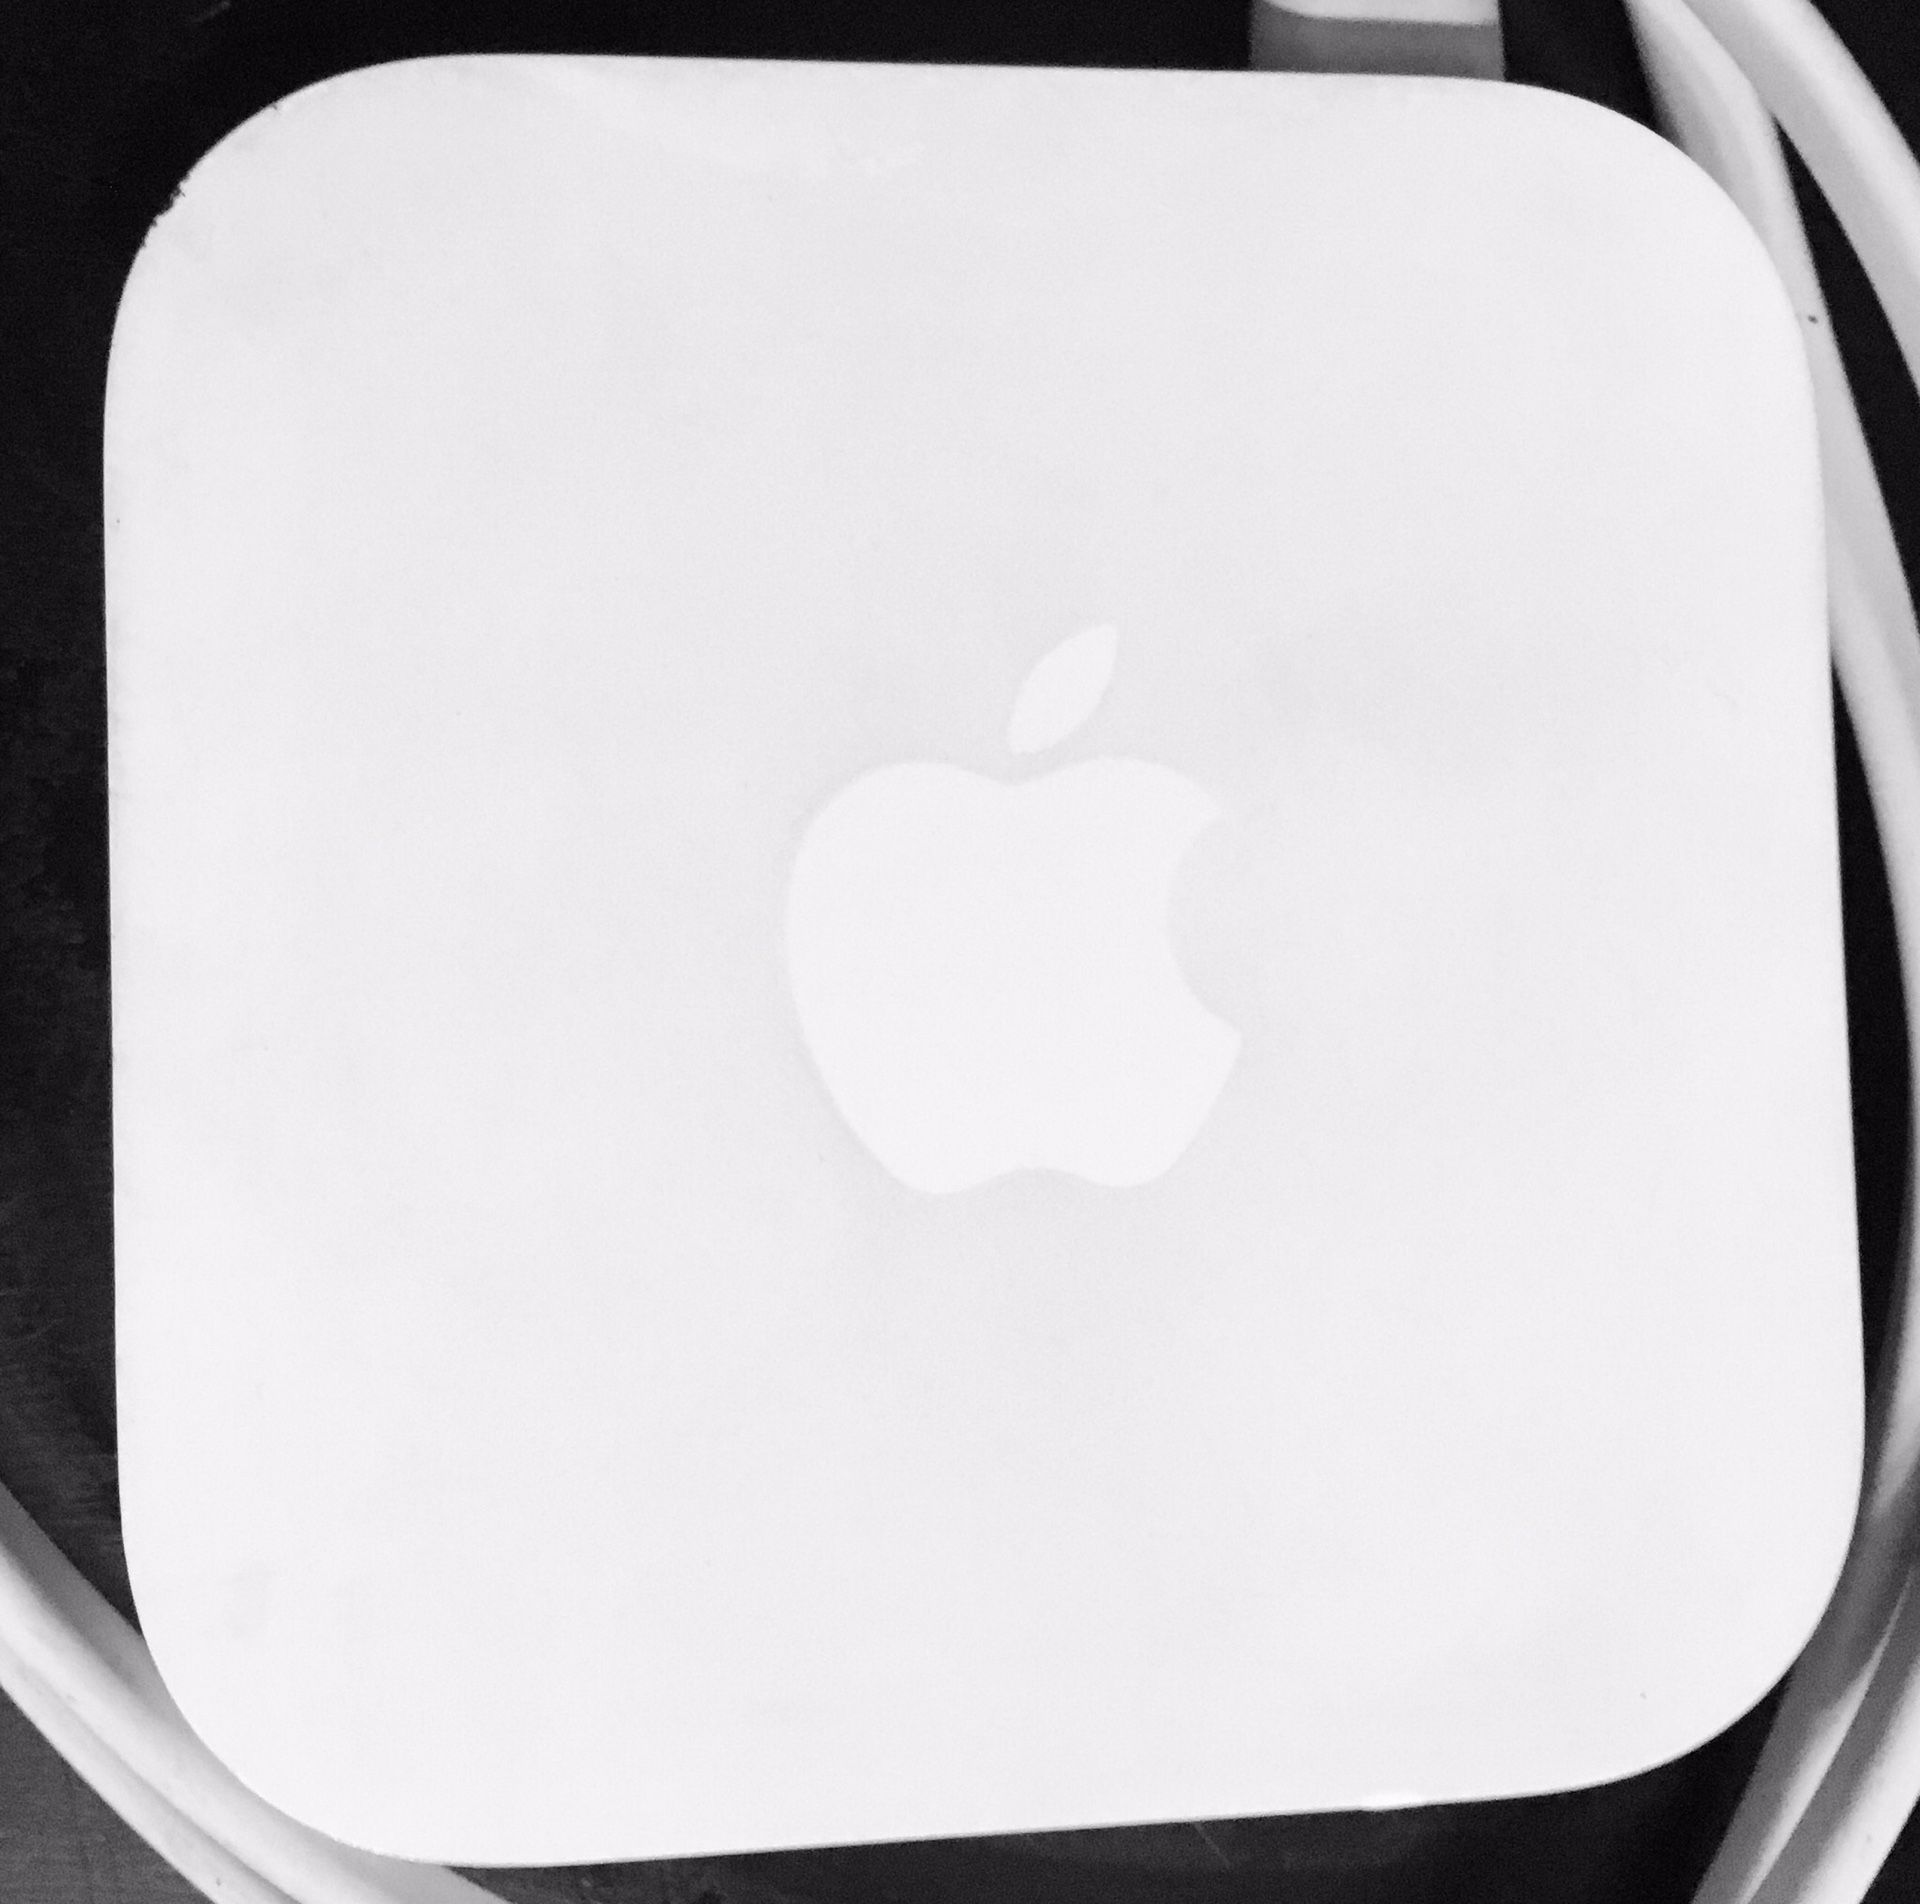 Apple Airport Express Wifi Router Base Station 802.11n A1392 MC414LL/A